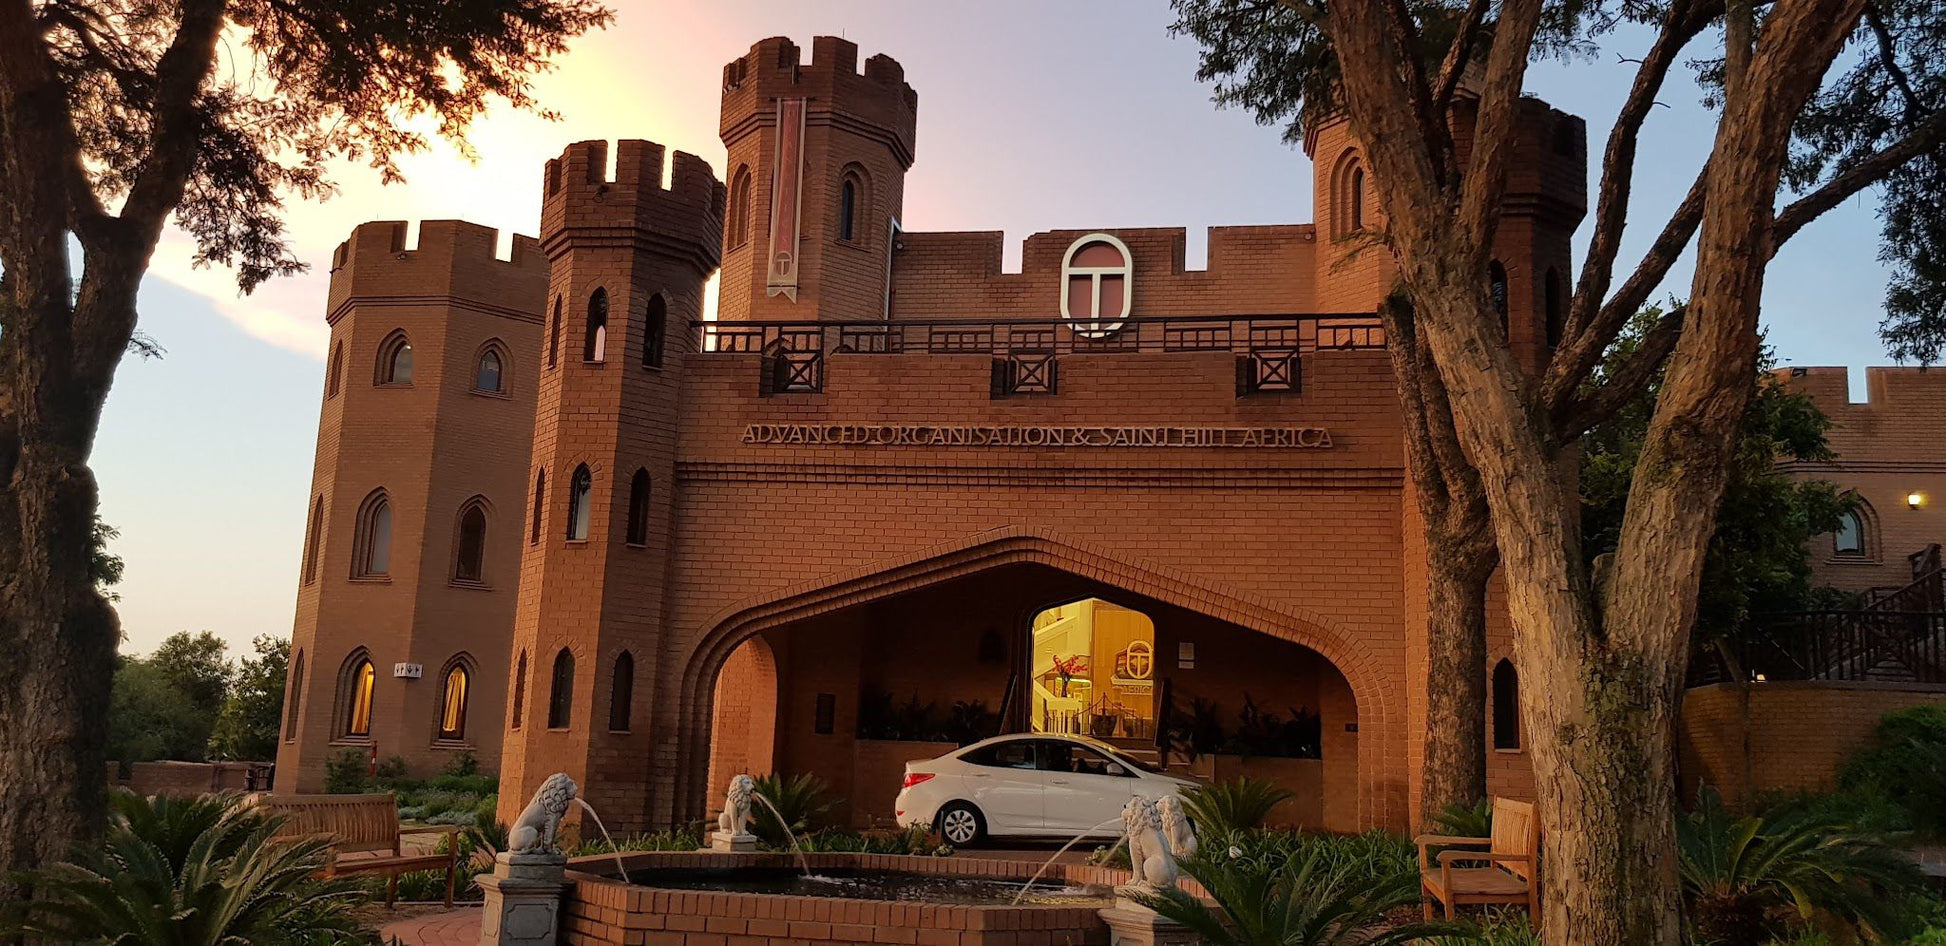  Castle Kyalami - Church of Scientology in South Africa